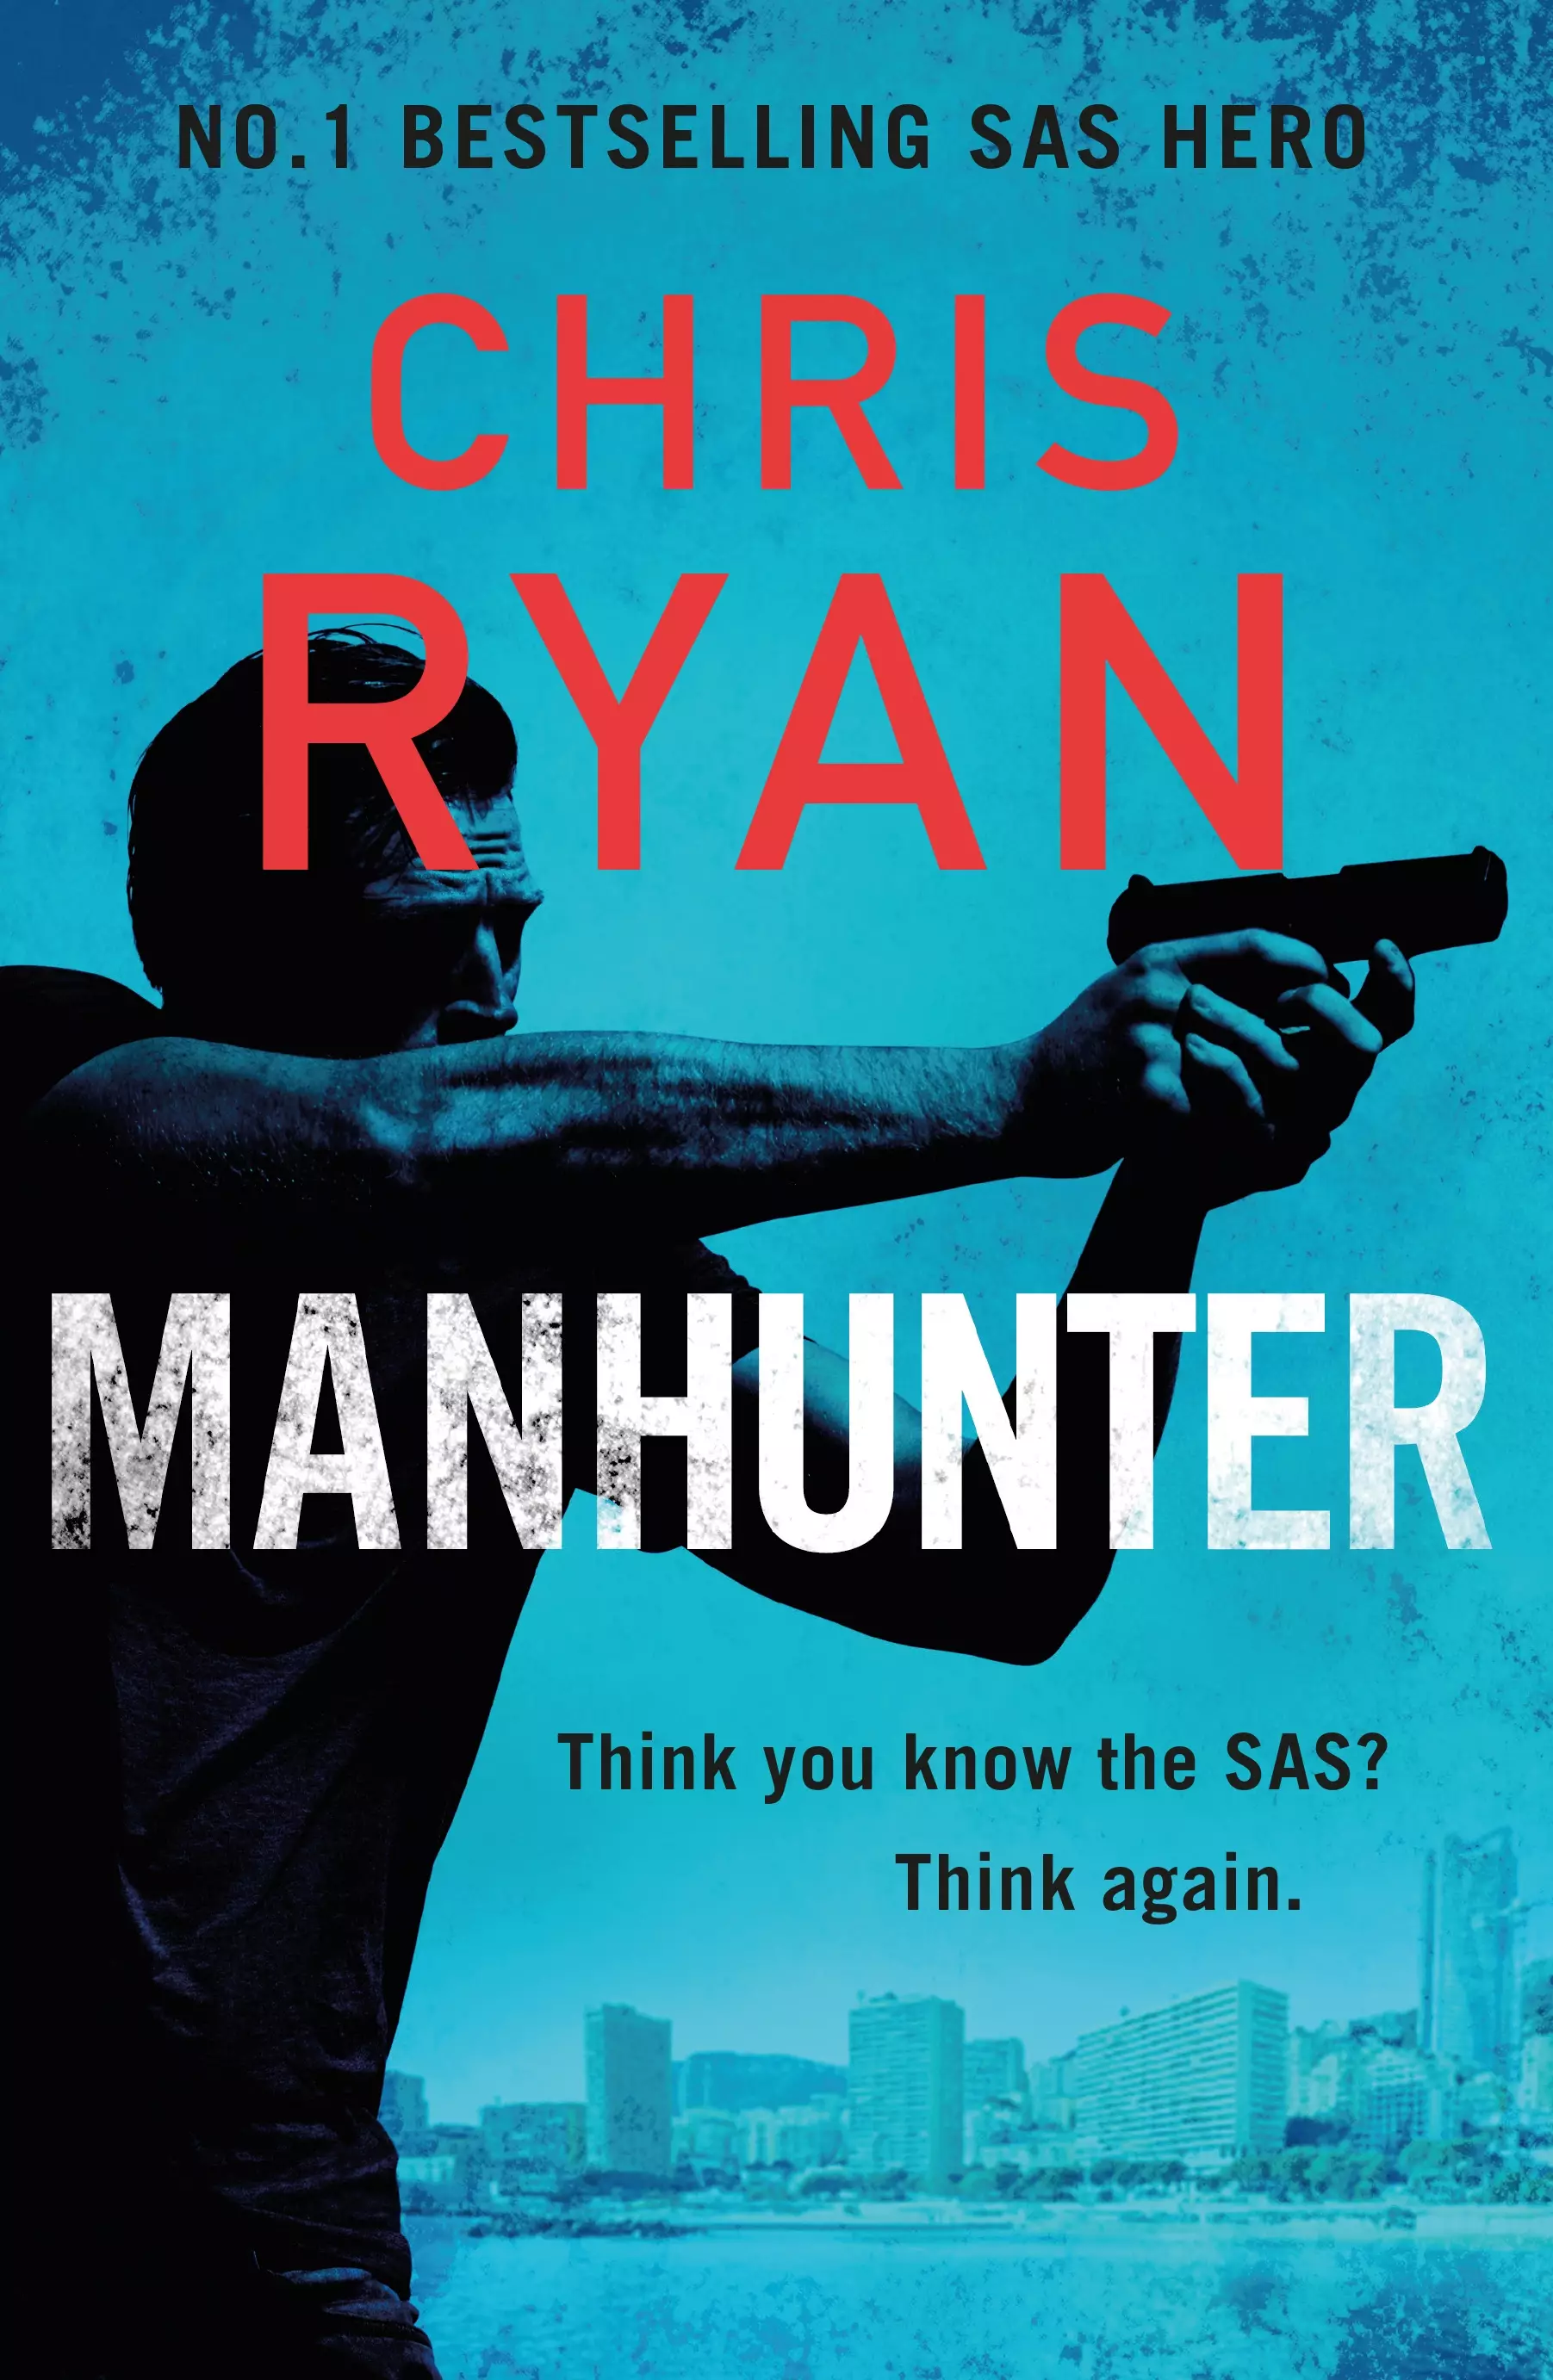 Chris Ryan's new book 'Manhunter' is out on May 27.